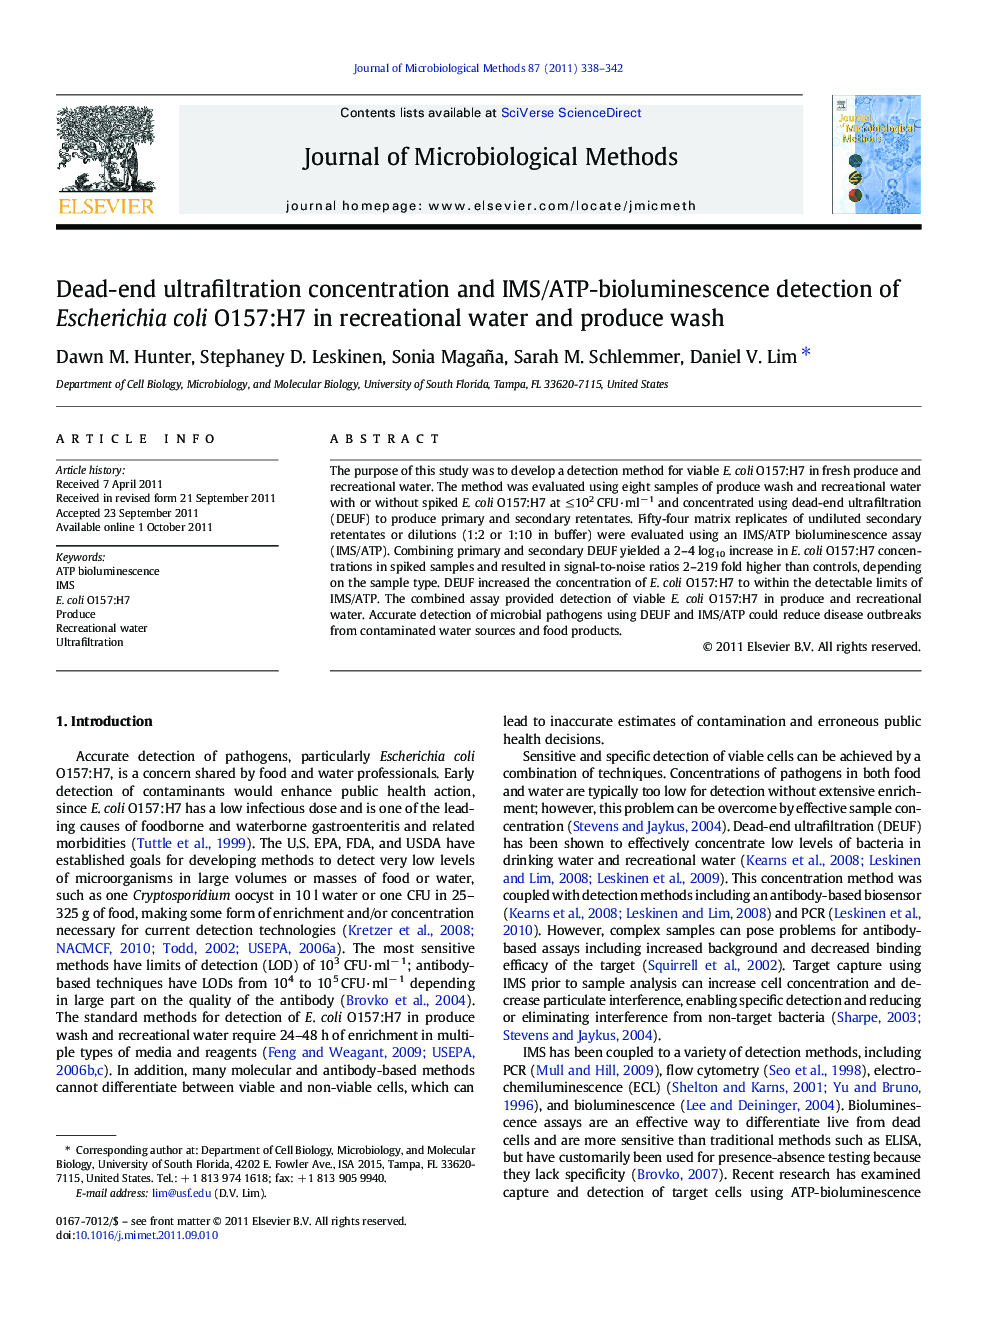 Dead-end ultrafiltration concentration and IMS/ATP-bioluminescence detection of Escherichia coli O157:H7 in recreational water and produce wash